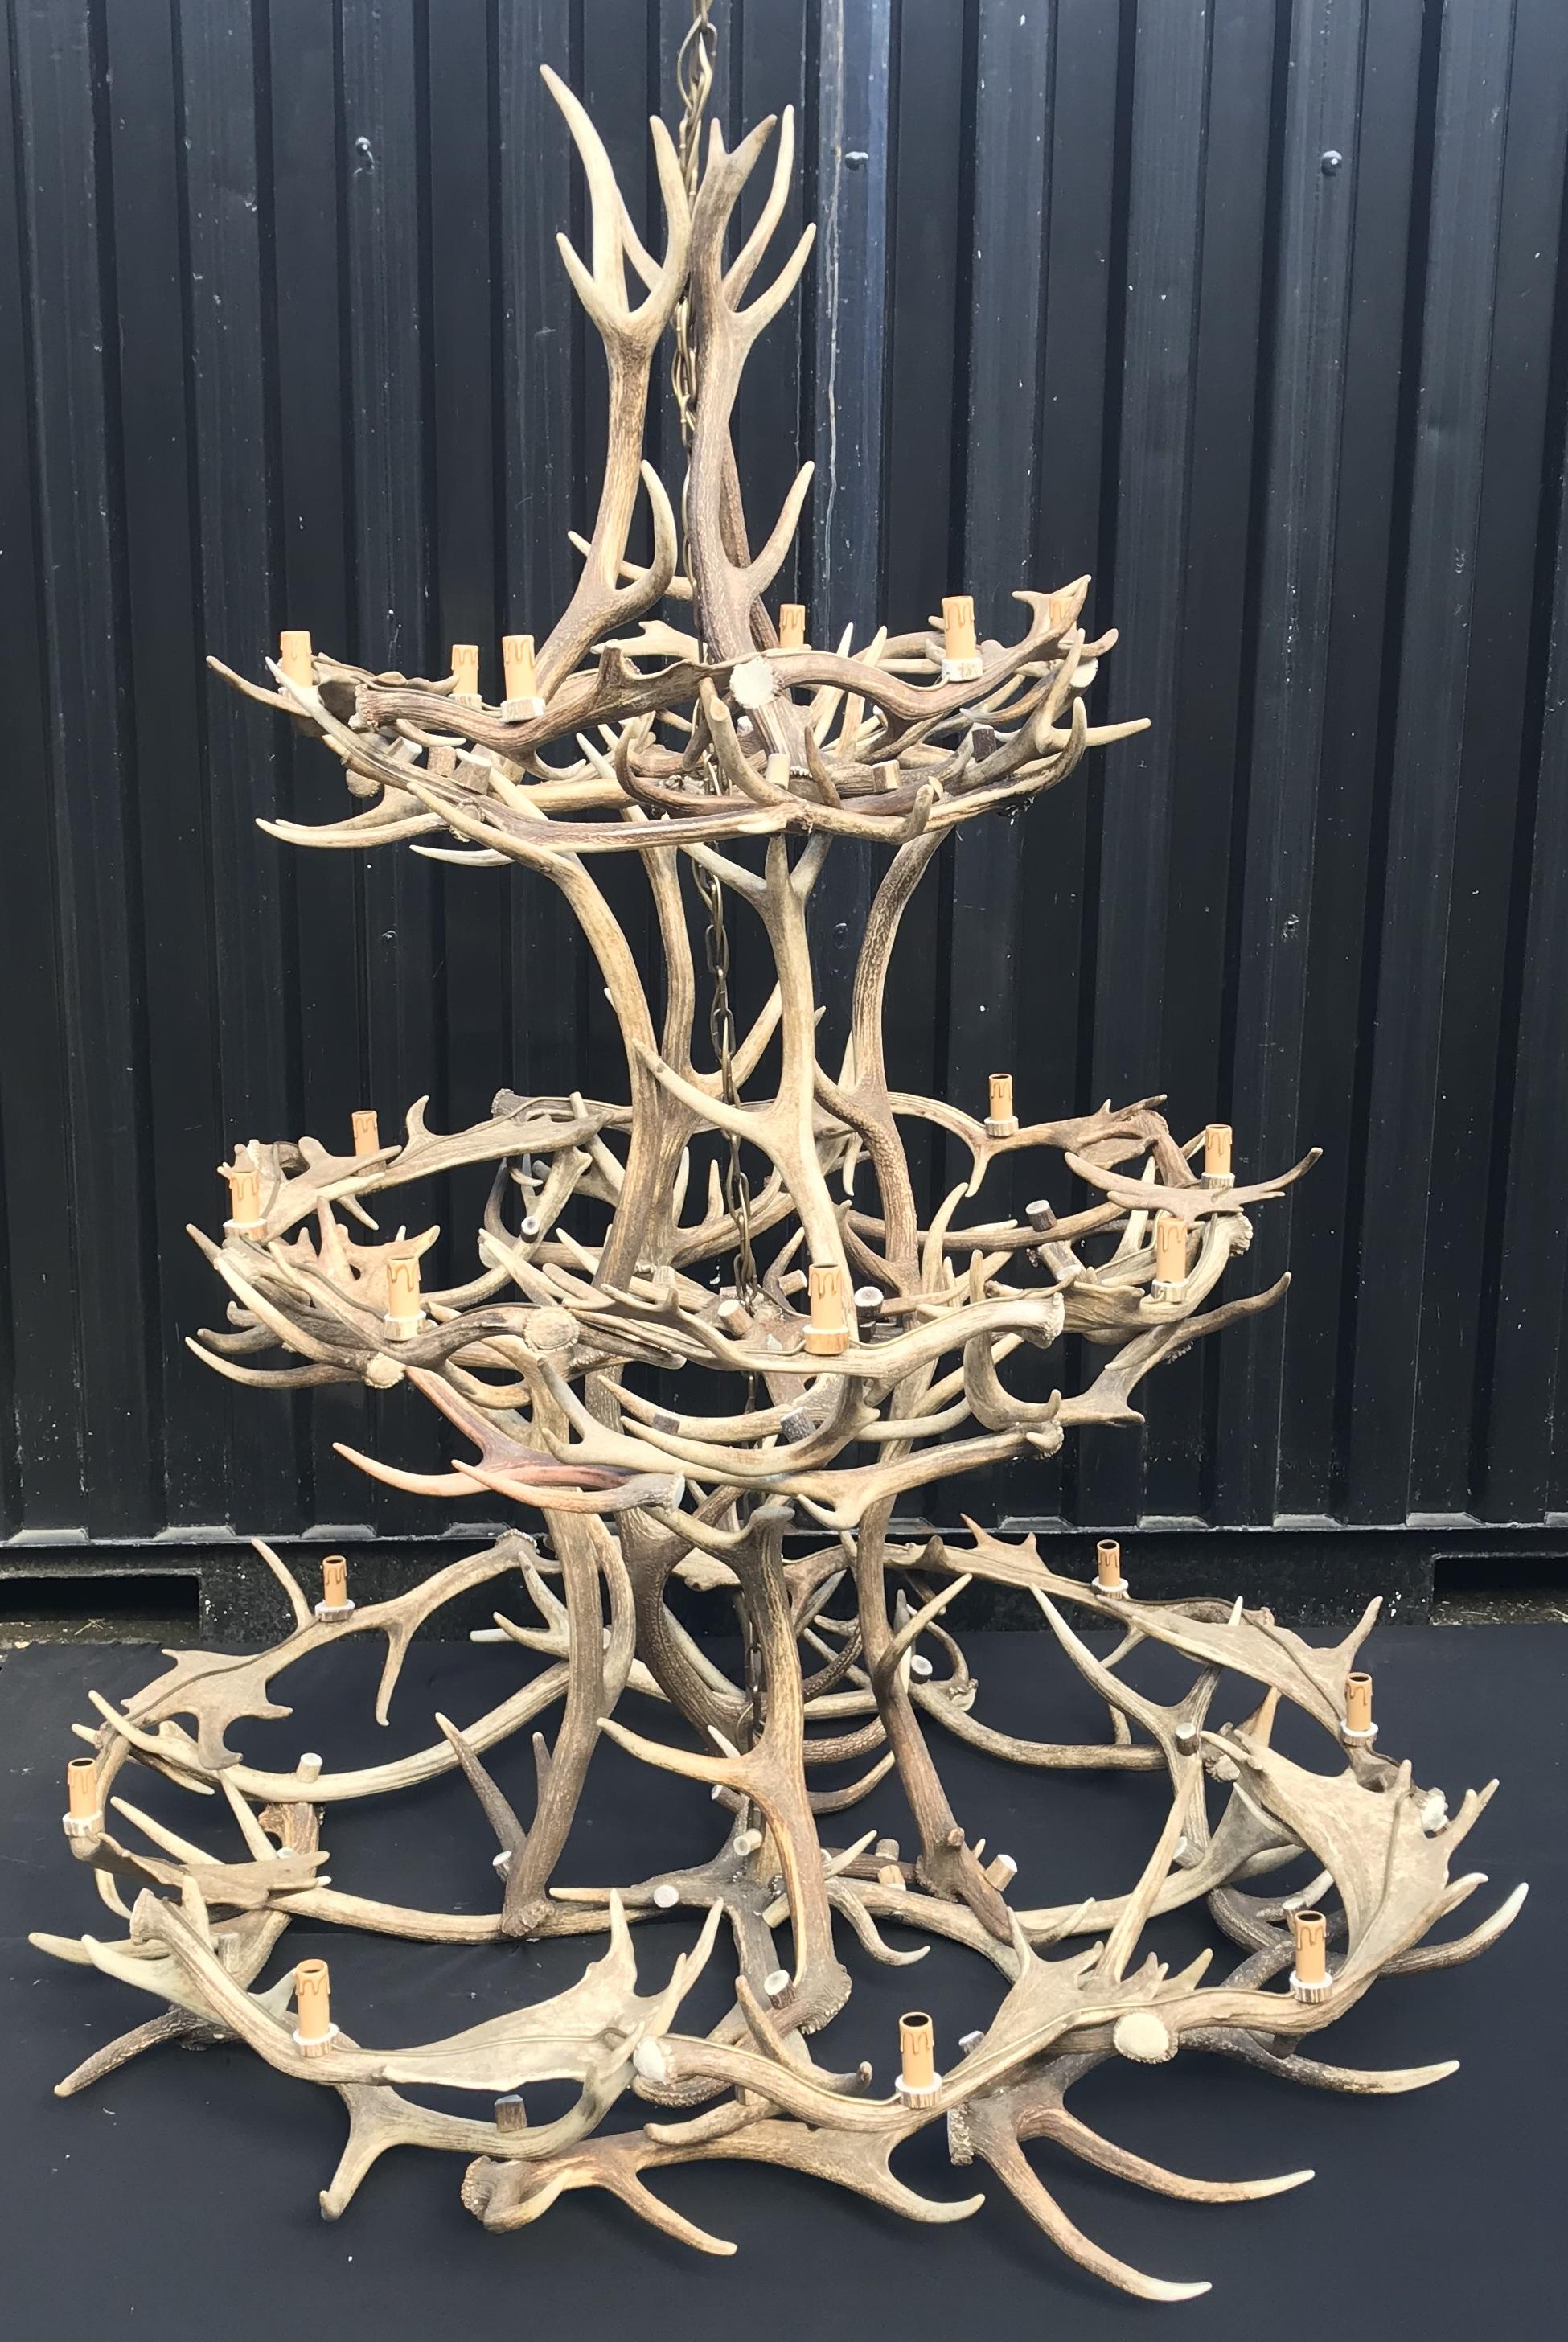 Contemporary Imposing Chandelier Made of Antlers